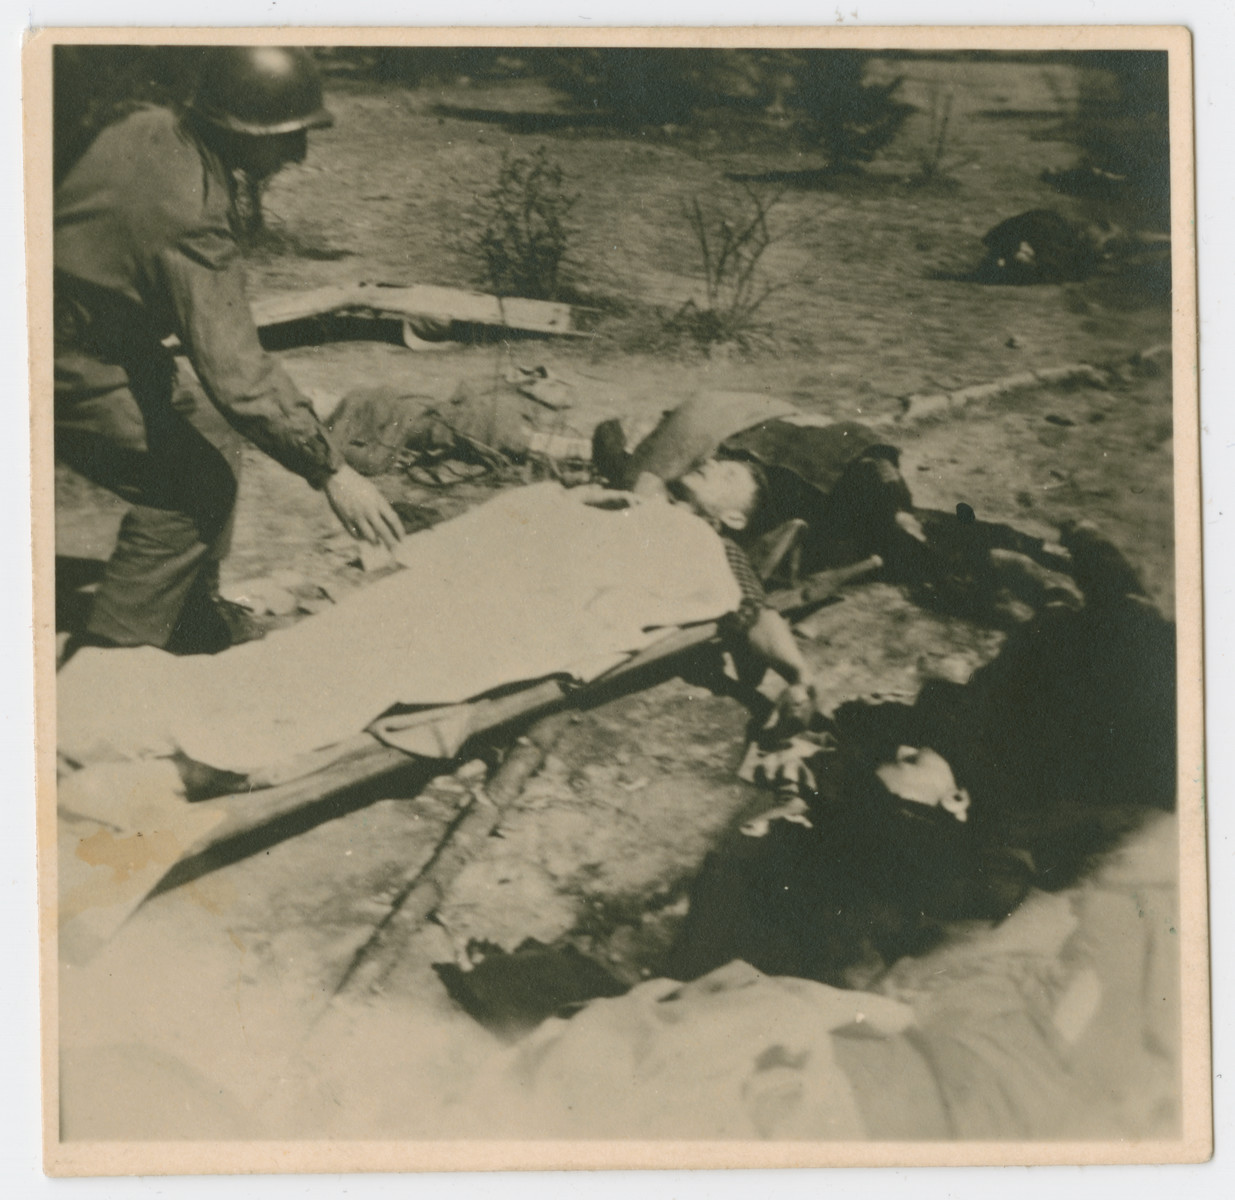 An American serviceman inspects the covered body of either a survivor or a victim lying on a stretcher on the grounds of the Ohrdruf concentration camp.